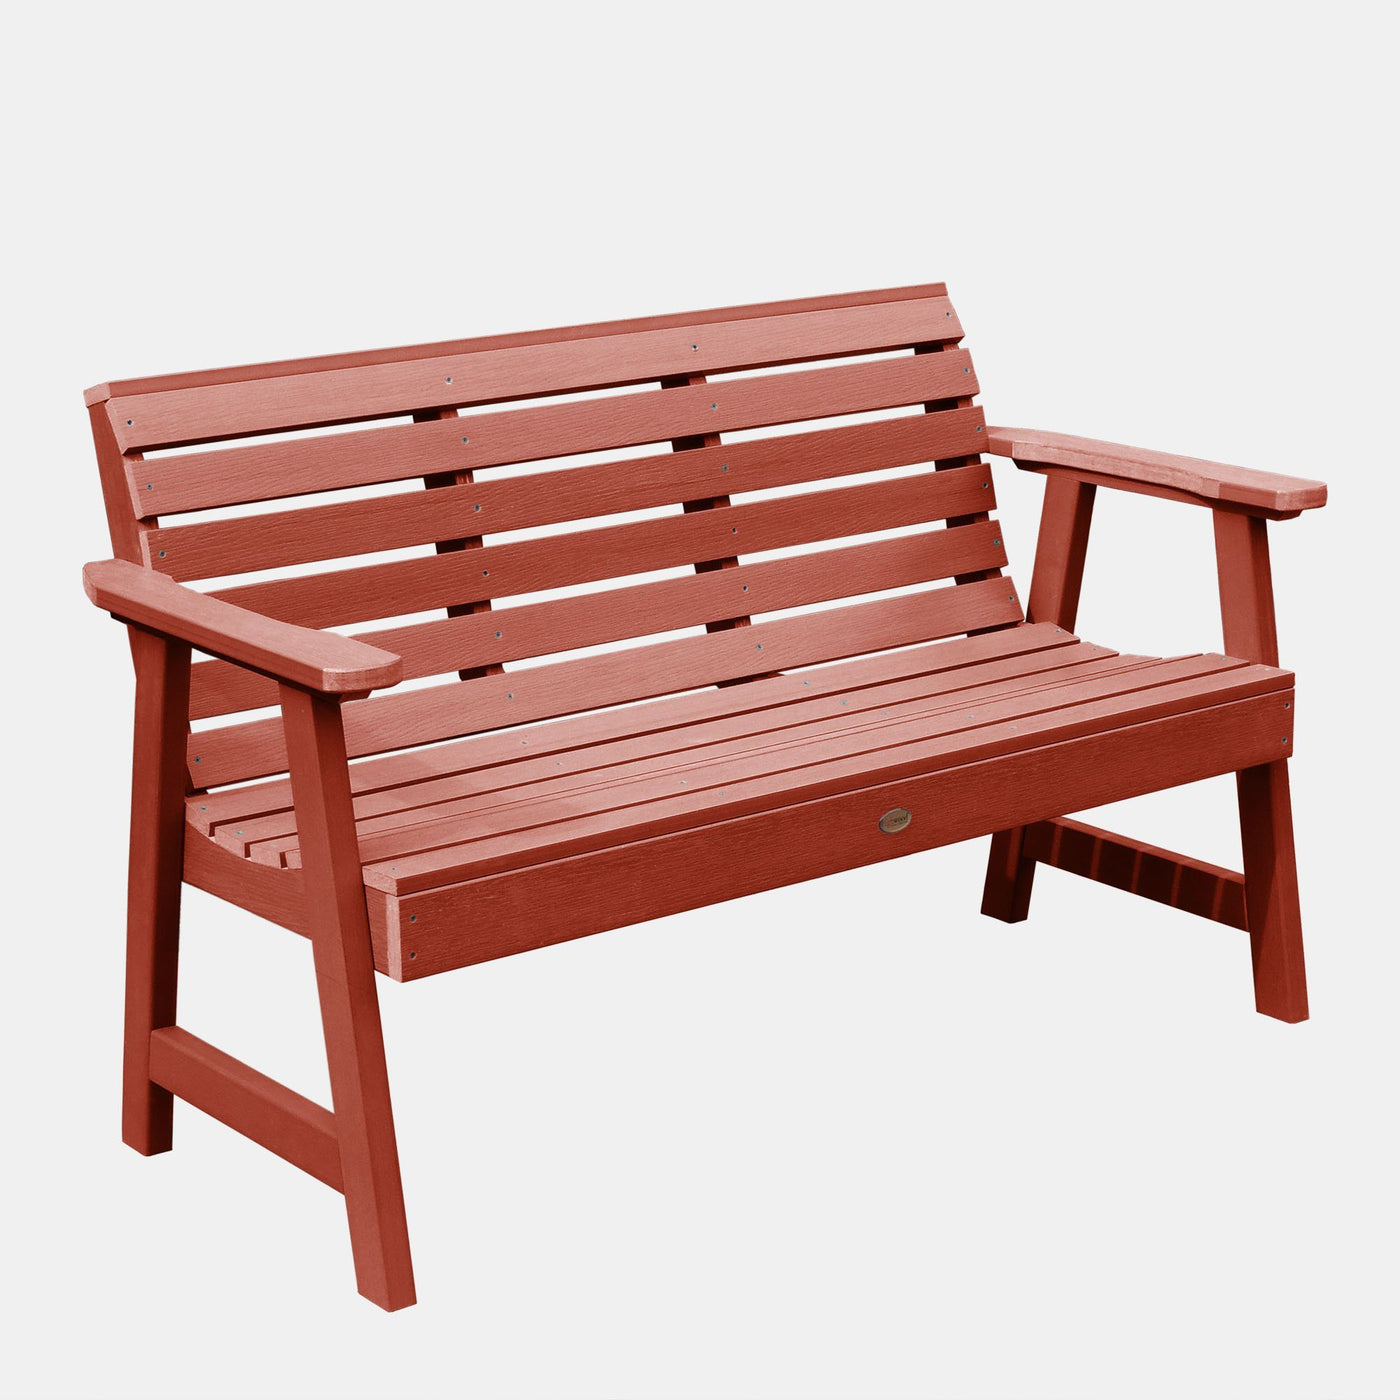 Weatherly Garden Bench - 5ft BenchSwing Highwood USA Rustic Red 